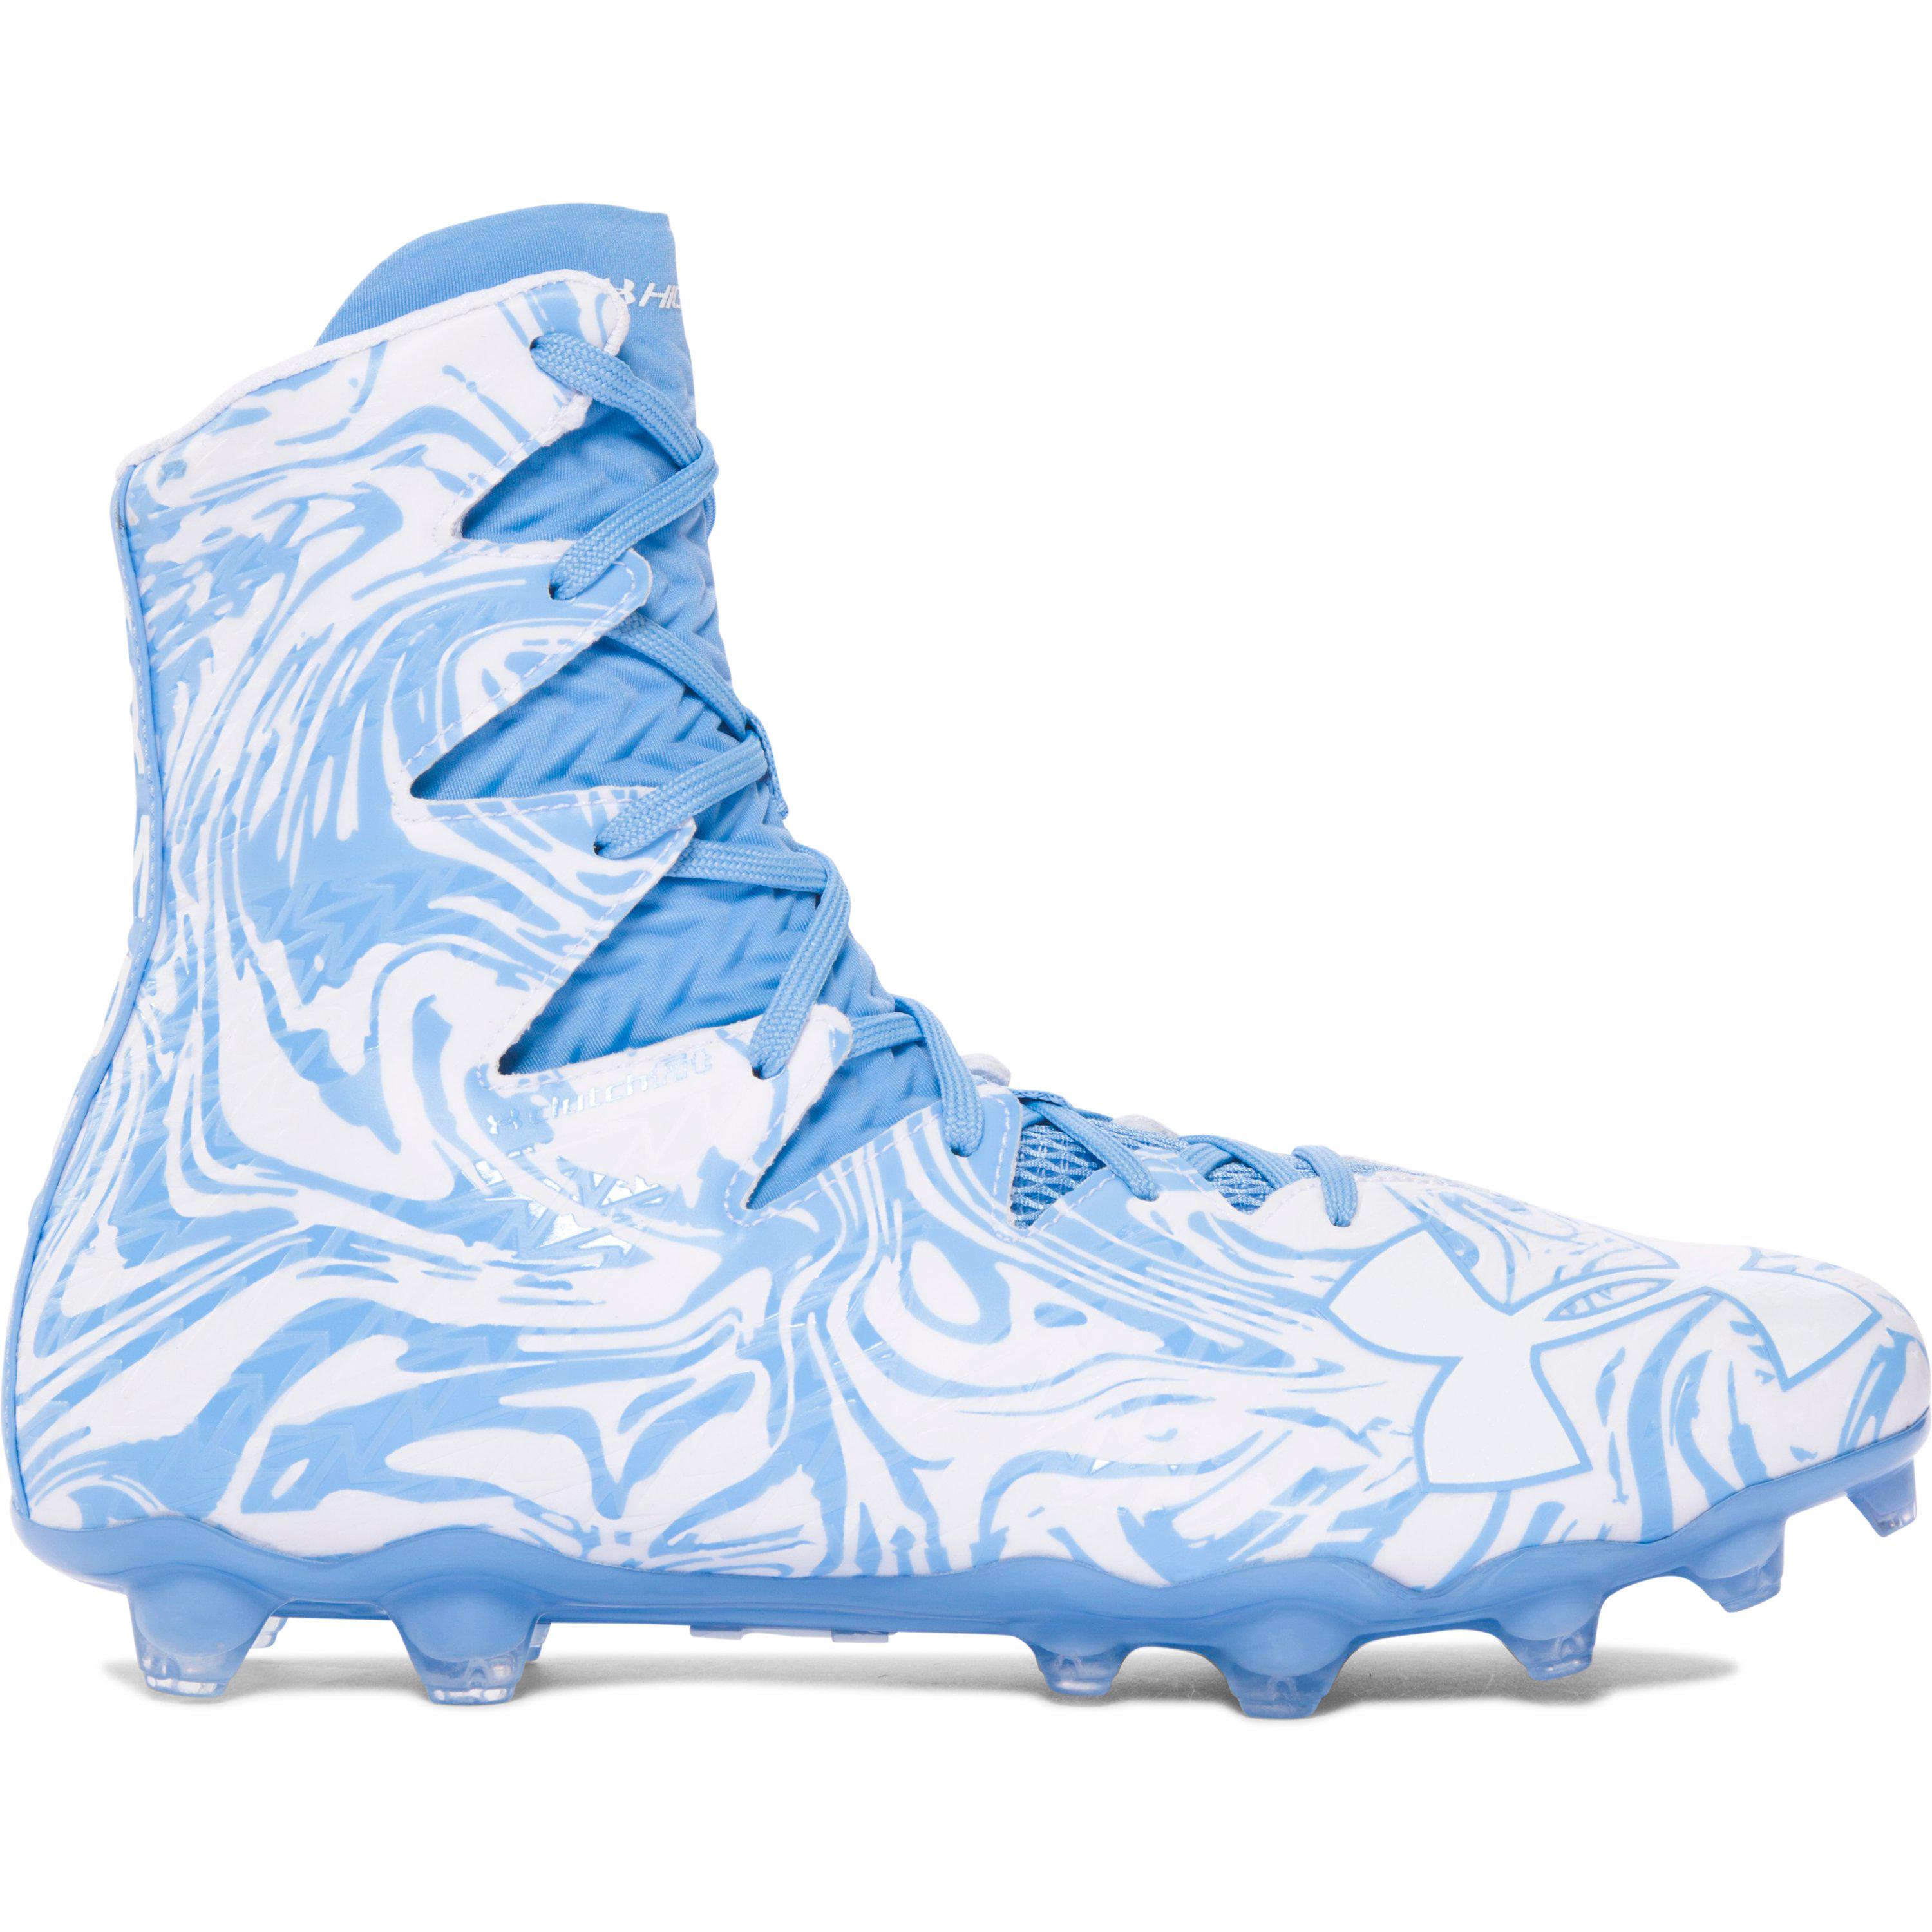 Under Armour Men's Ua Highlight Lux Mc Football Cleats in Blue for 